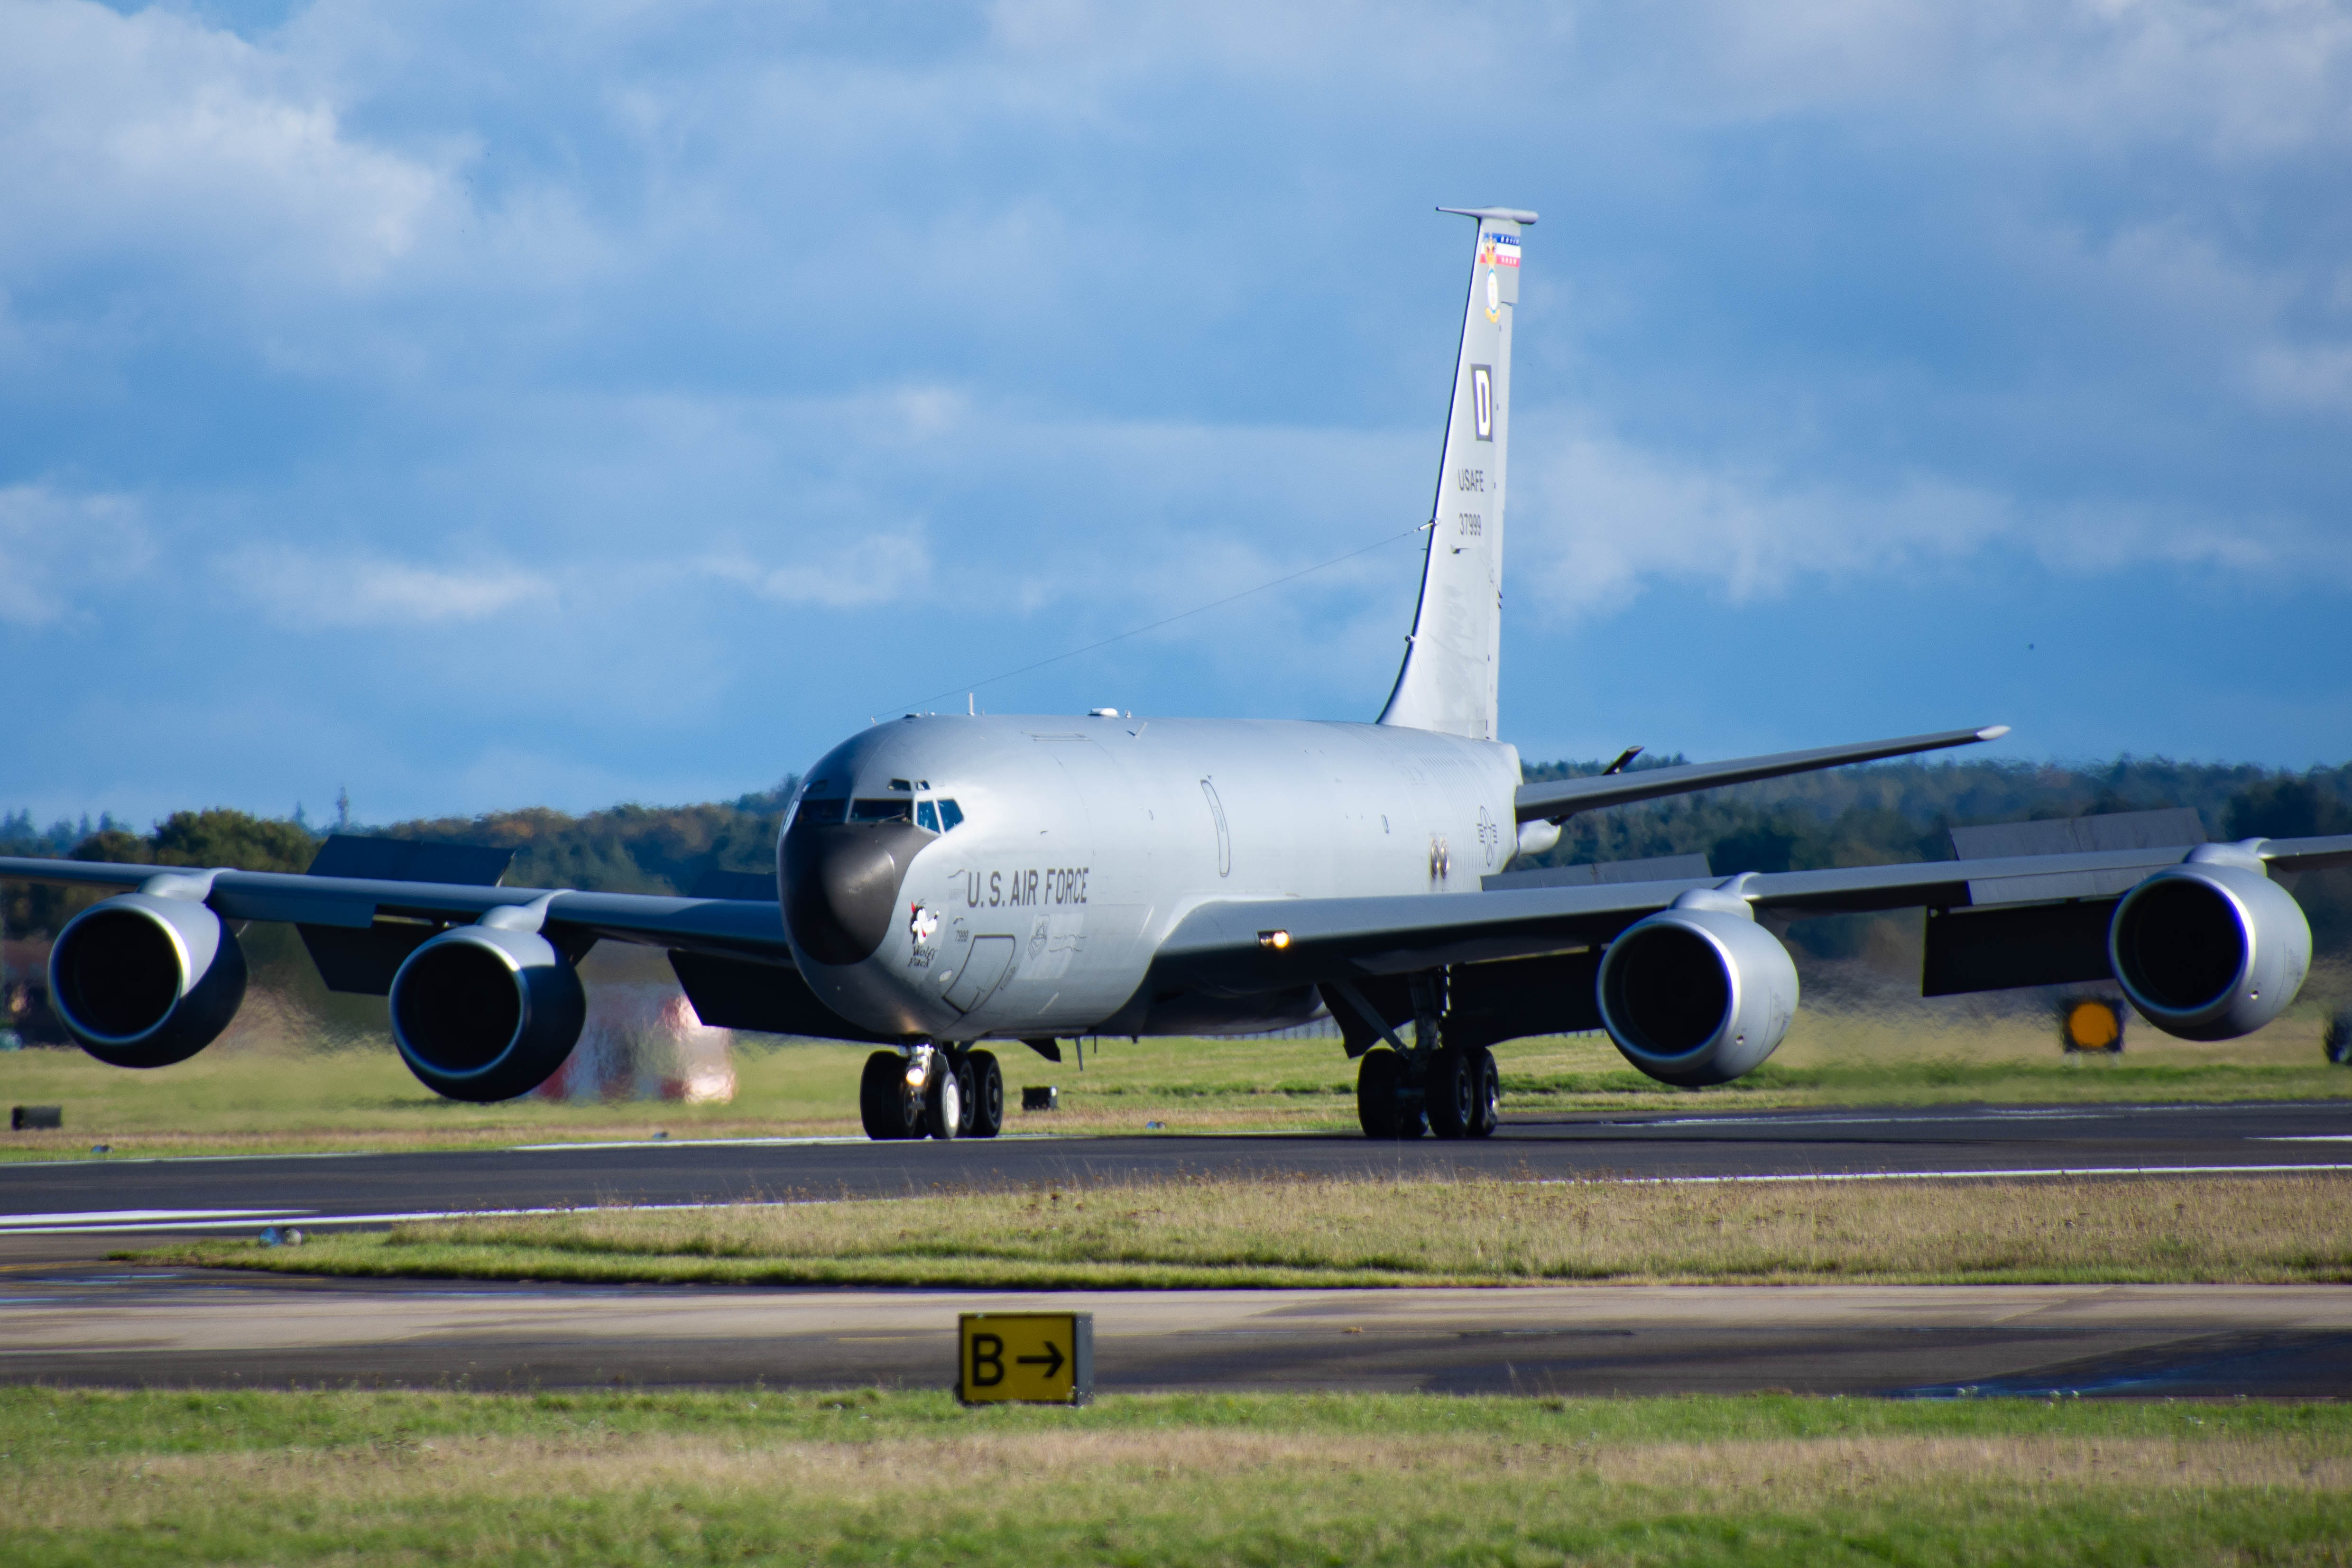 63-7999/637999 Withdrawn from use Boeing C-135 Stratotanker Airframe Information - AVSpotters.com